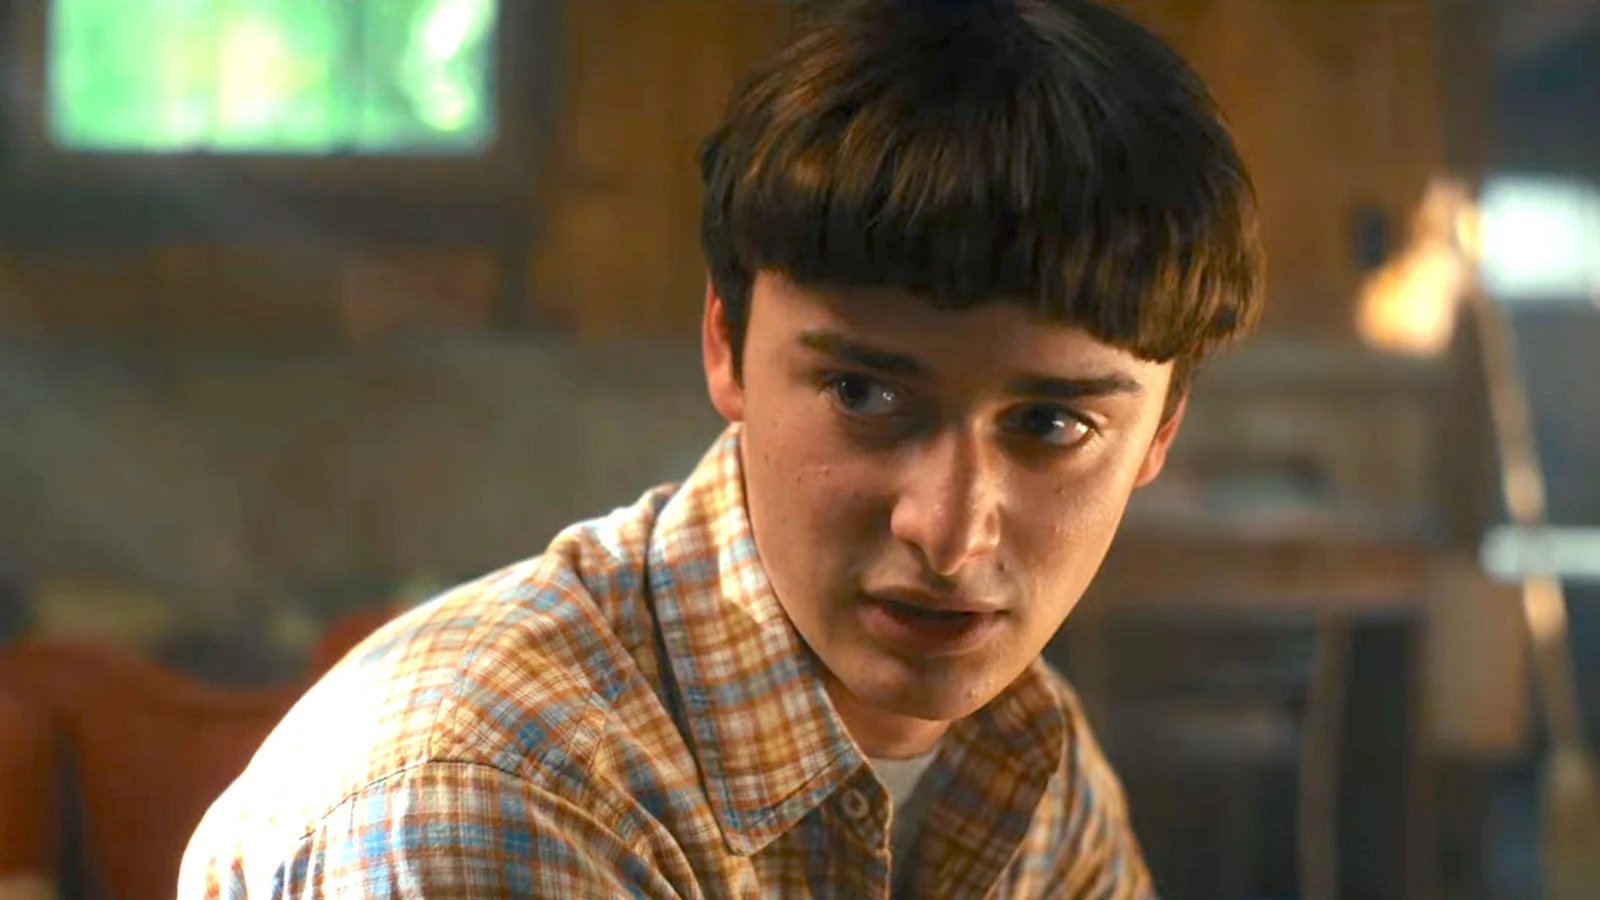 Stranger Things' Season 4: Noah Schnapp Confirms Will Byers Is Gay, Loves Mike. The Mary Sue